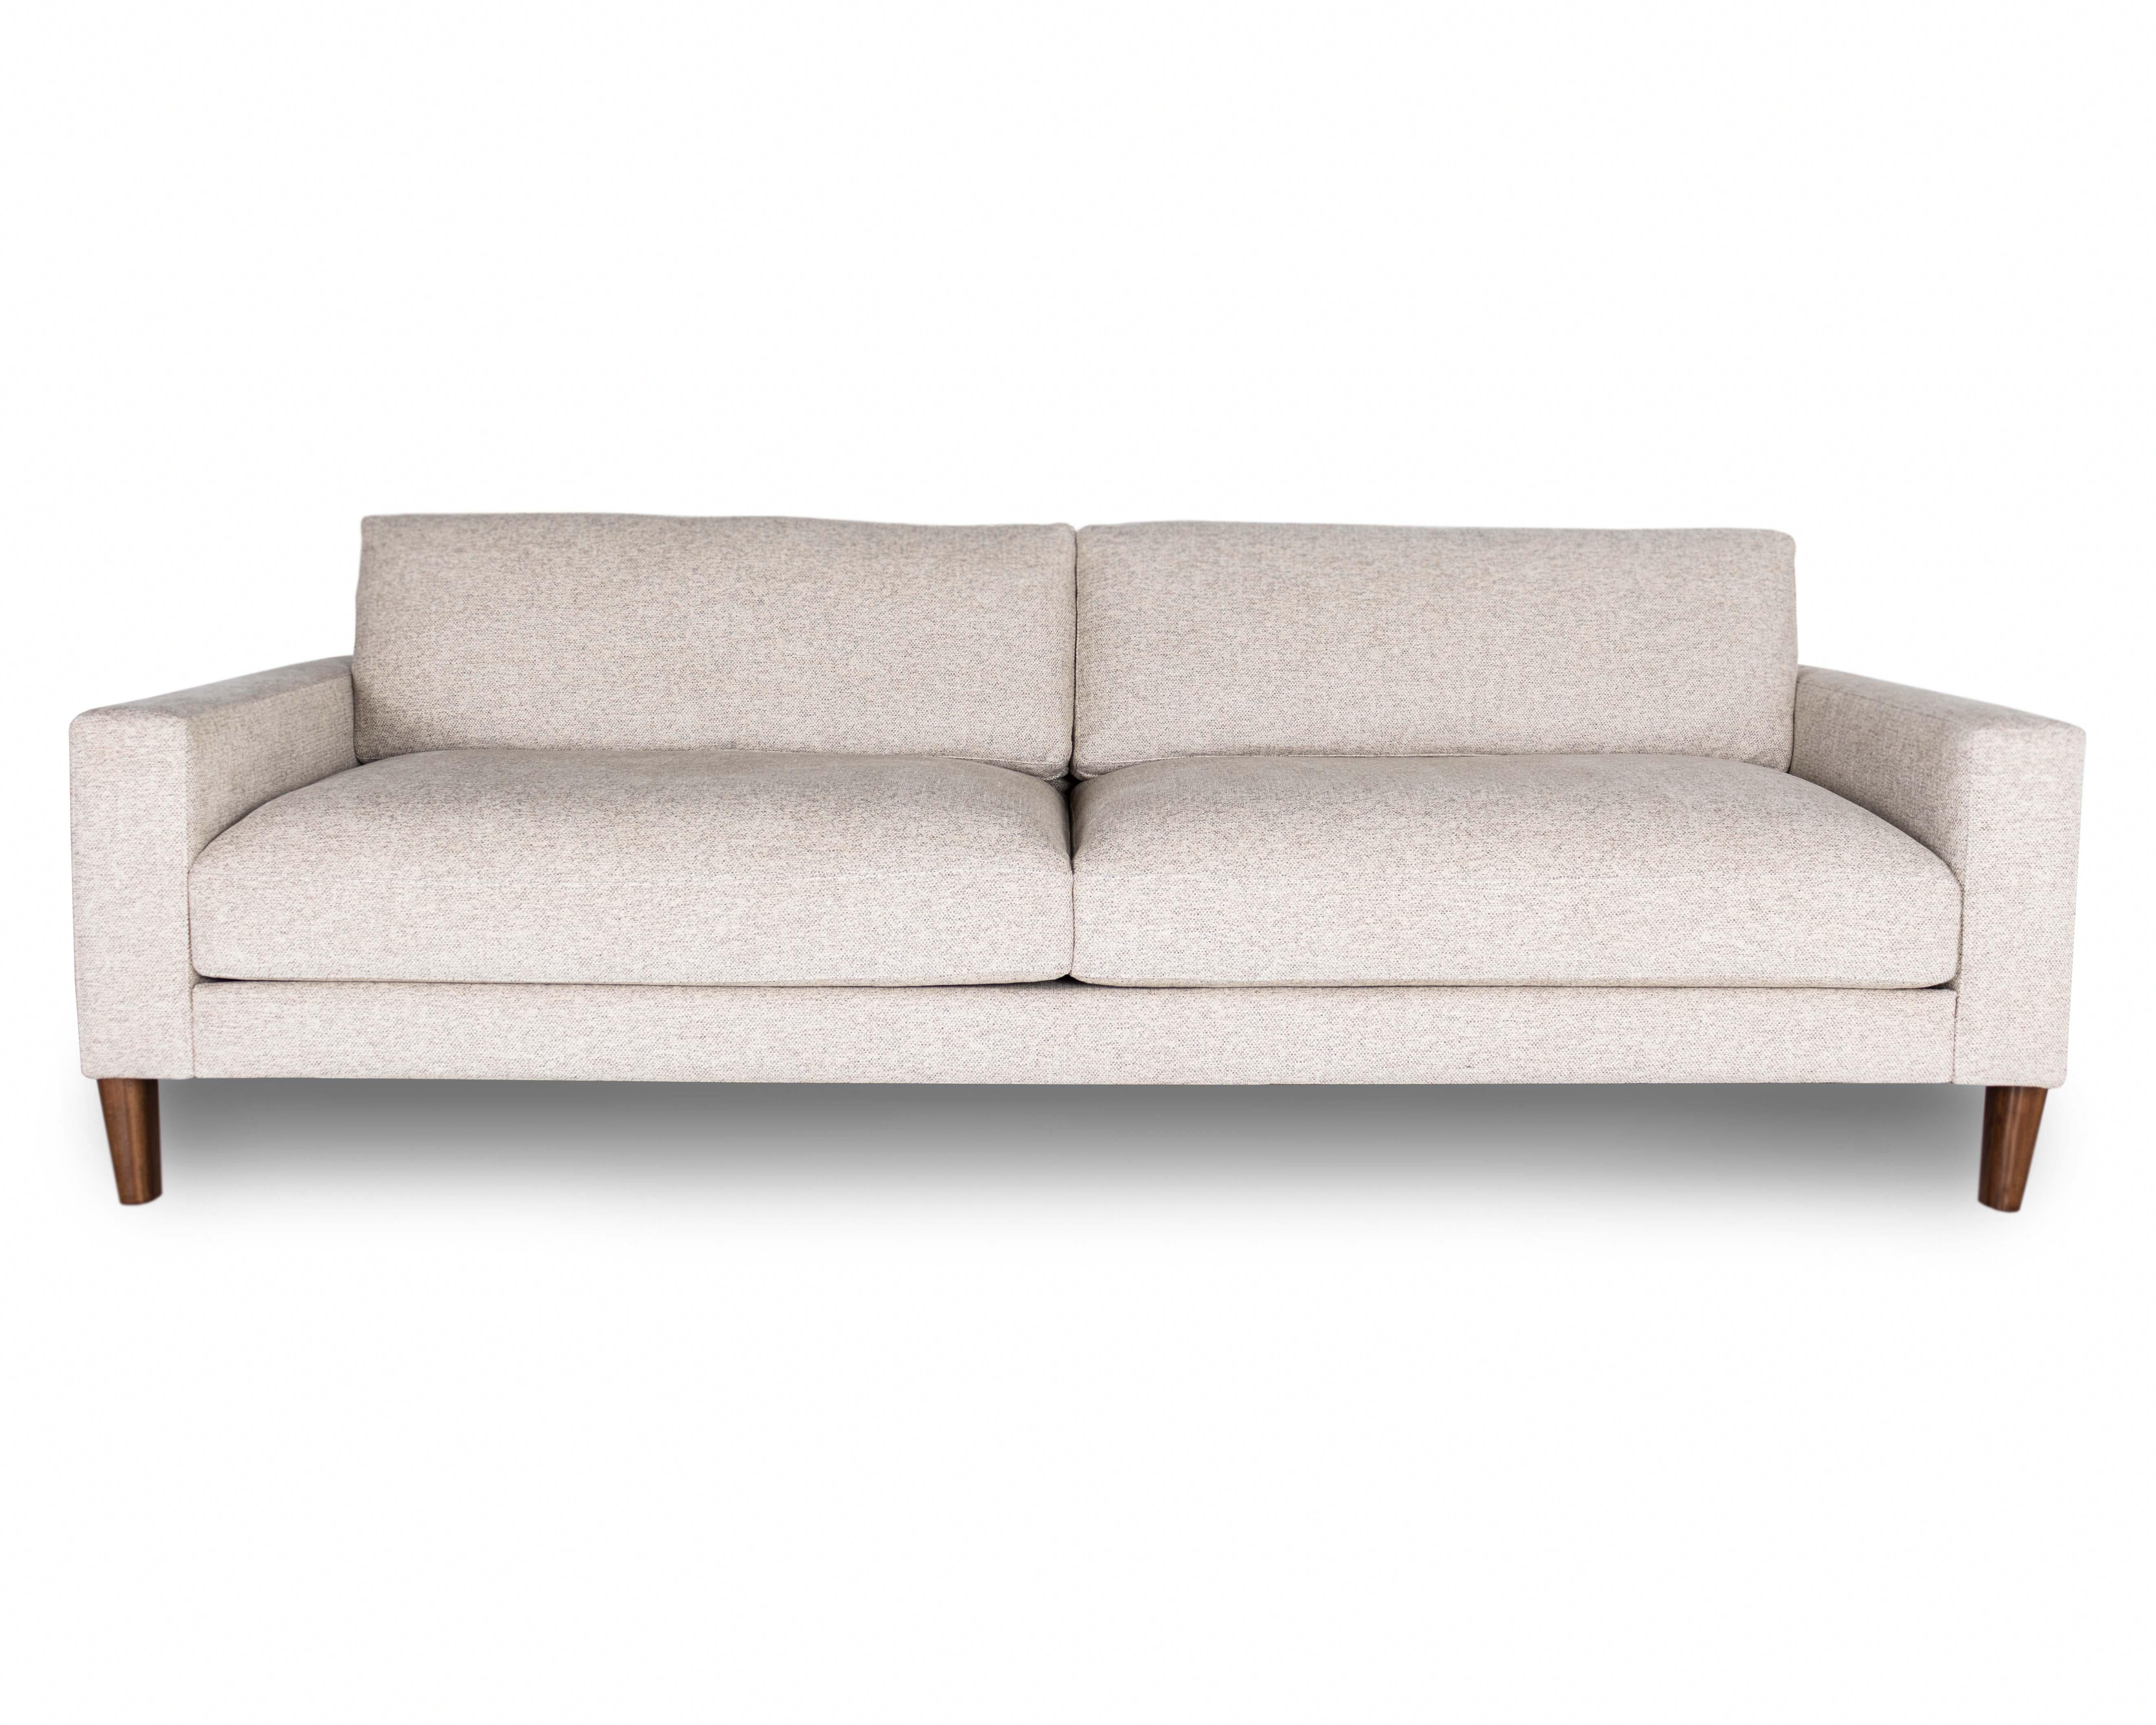 The Alpine high leg sofa and sectional take inspiration from inspirational architecturally constructed wooden structures of Texas. The Alpine leg has contouring angles that start at the base, grow up, and taper nicely into the outside, finishing